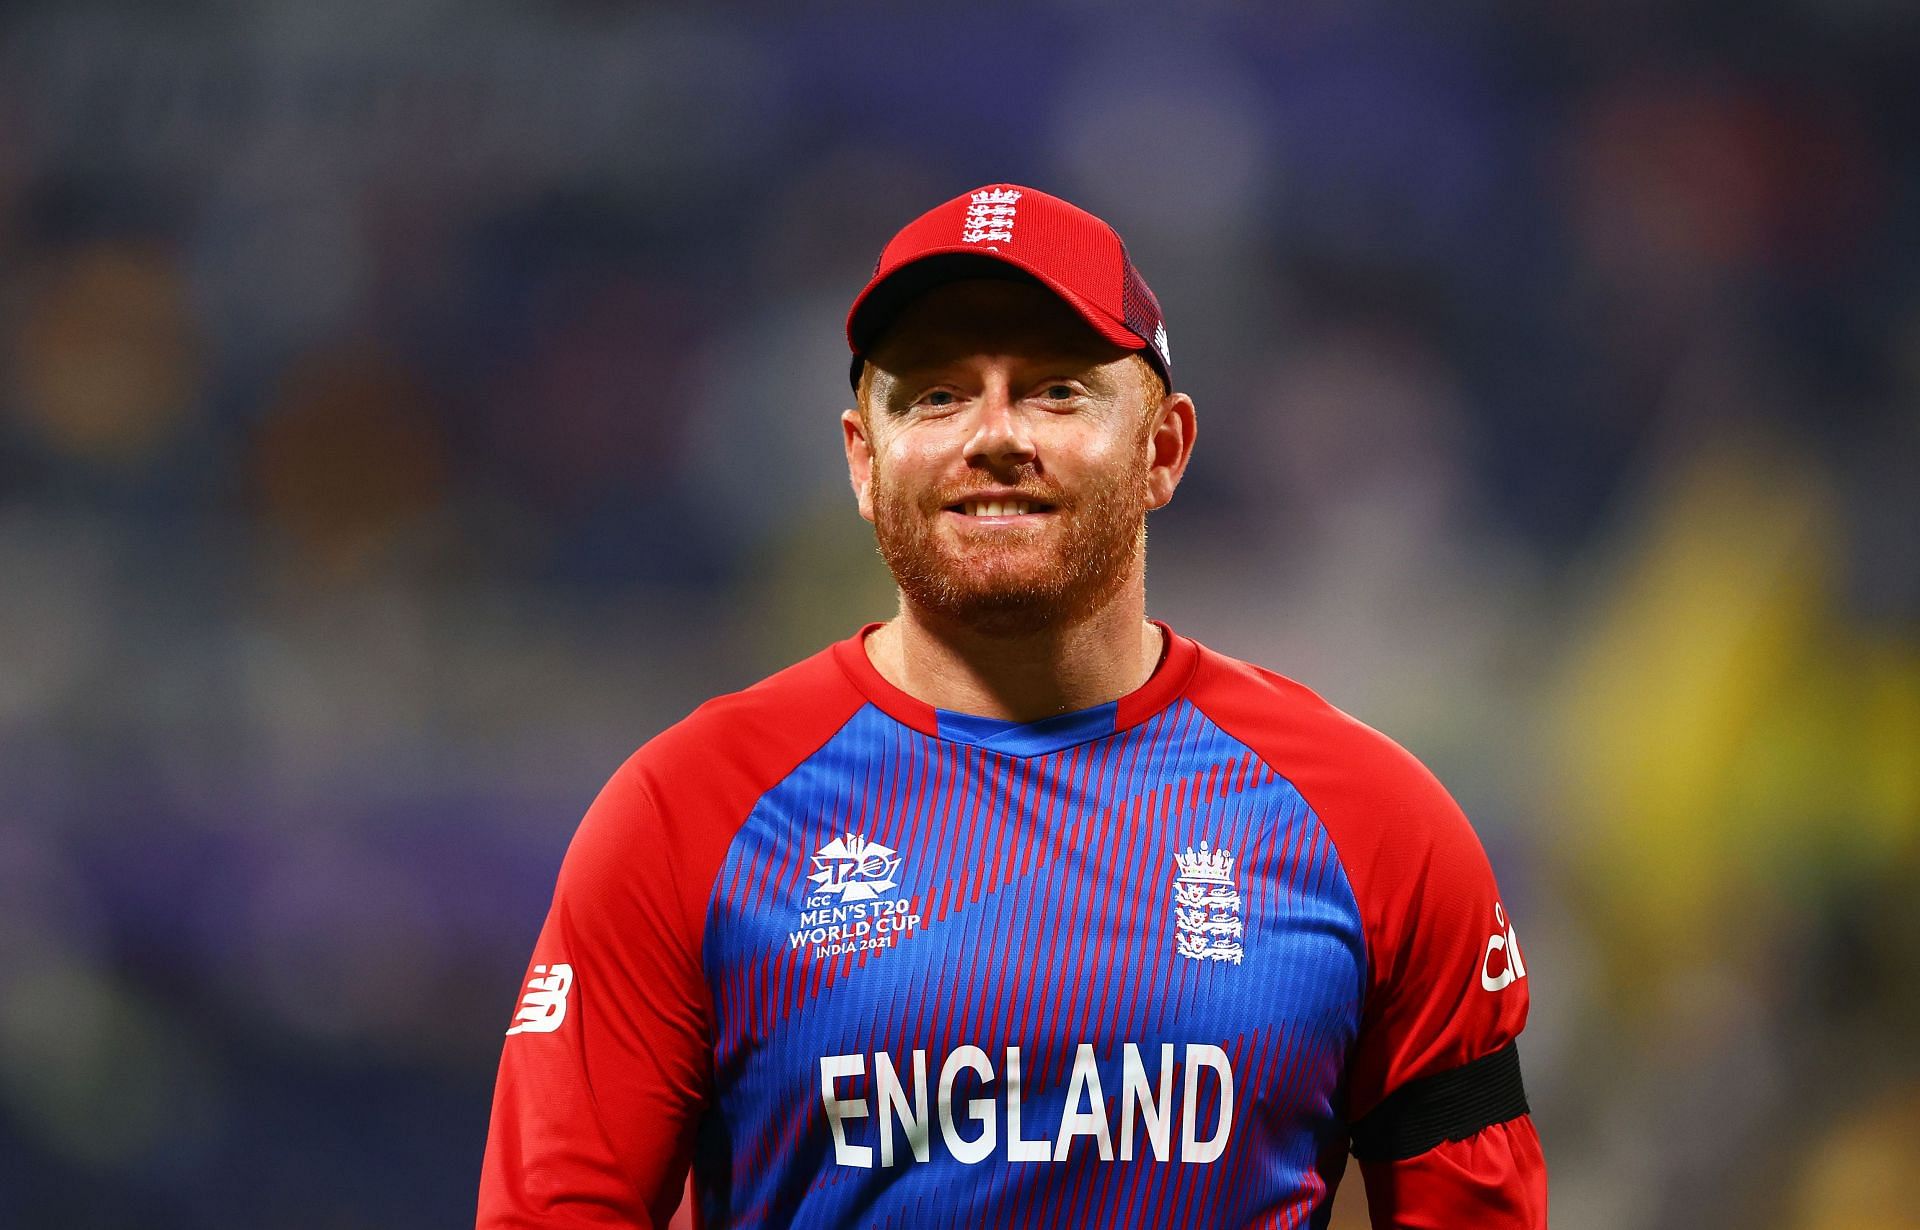 Jonny Bairstow will be available in the IPL auction 2022.